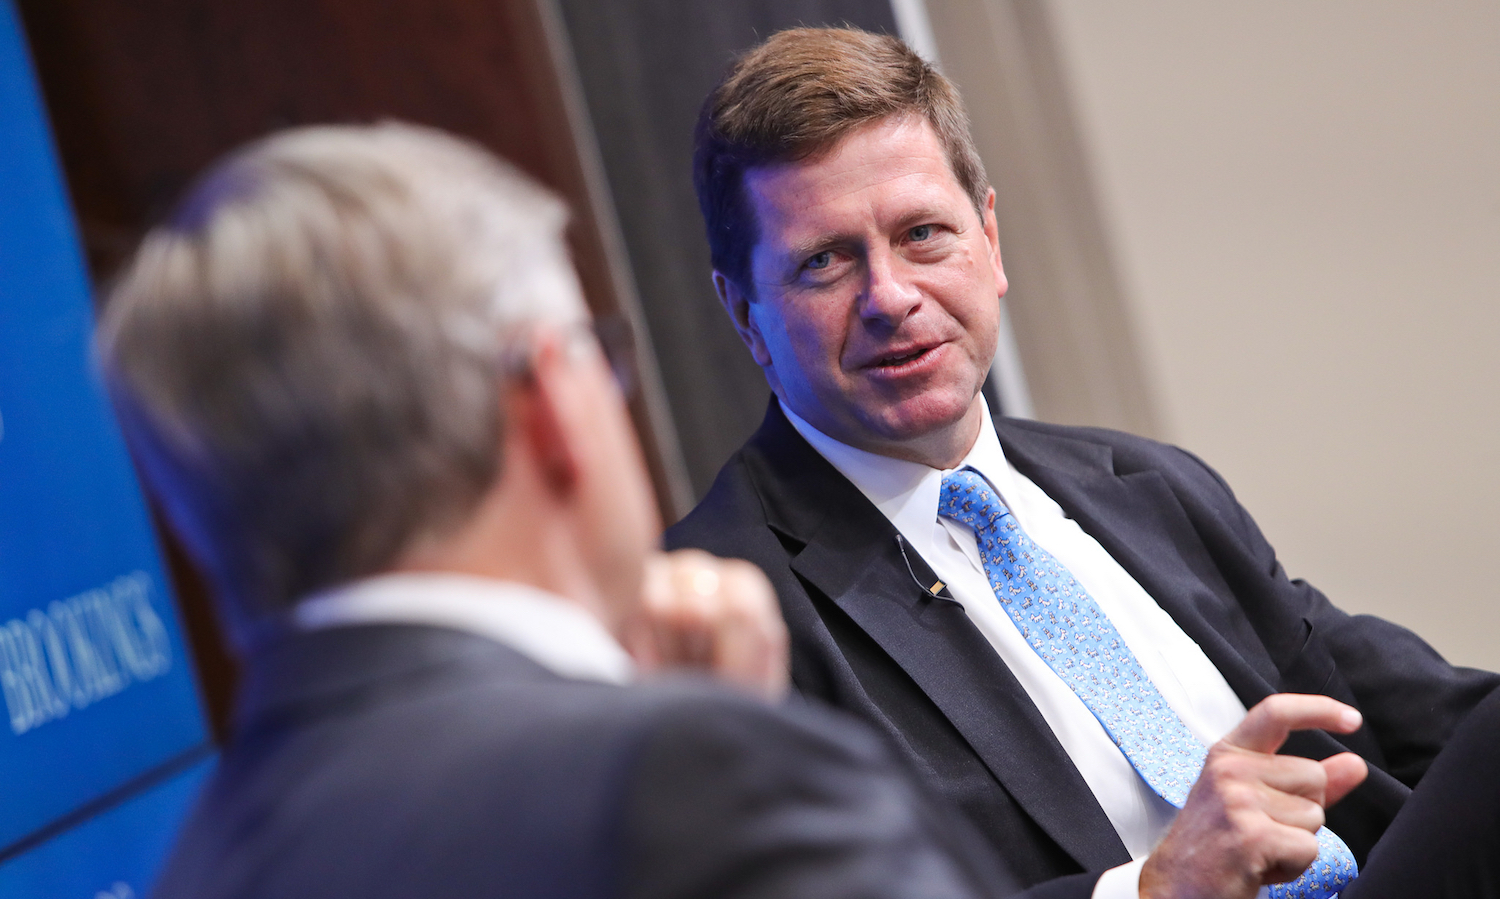 ICOs Are ‘Effective Way’ To Raise Capital If Rules Are Followed: SEC Chairman